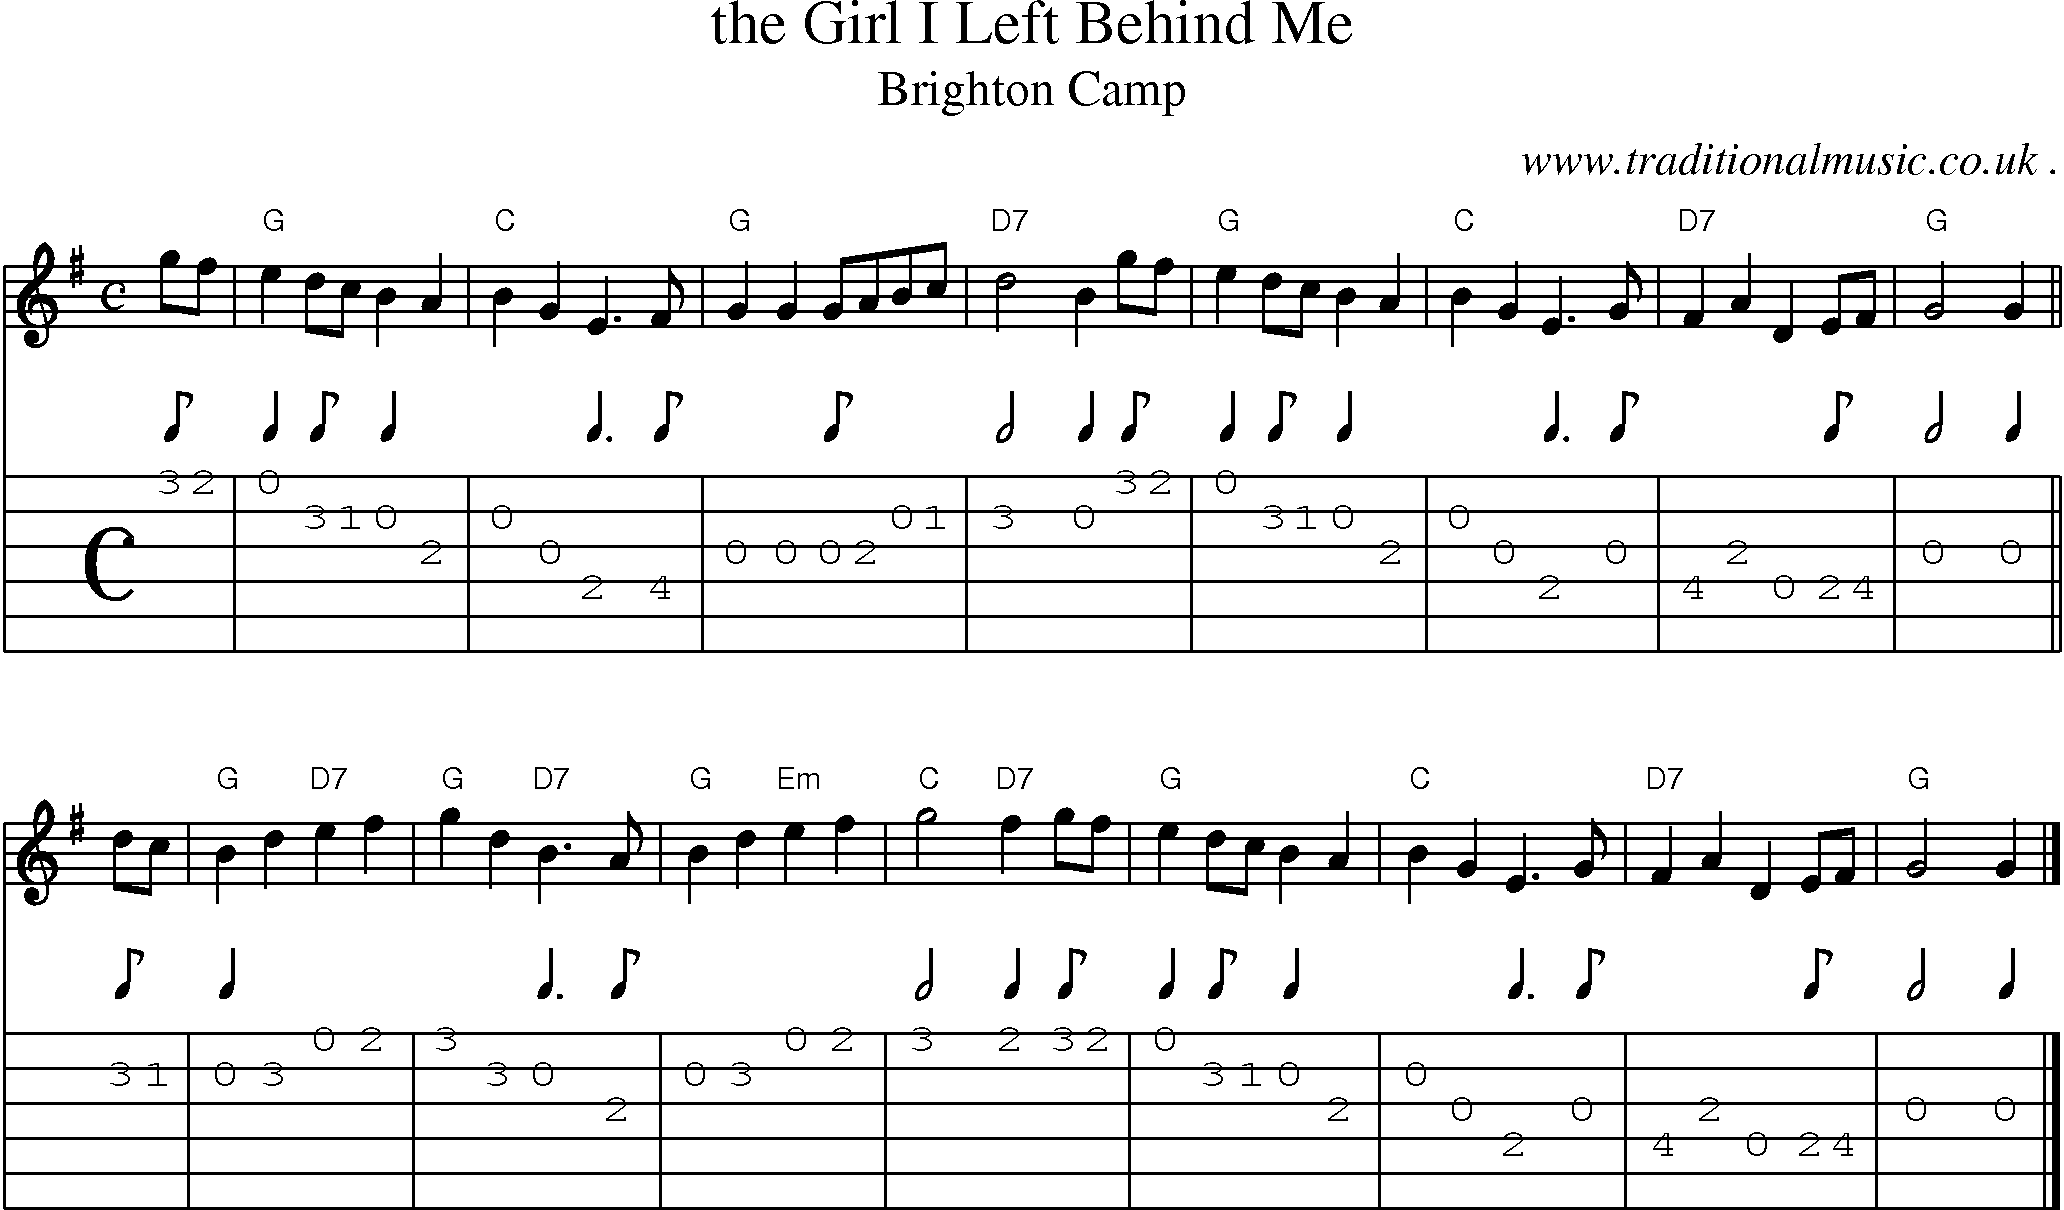 Sheet-music  score, Chords and Guitar Tabs for The Girl I Left Behind Me